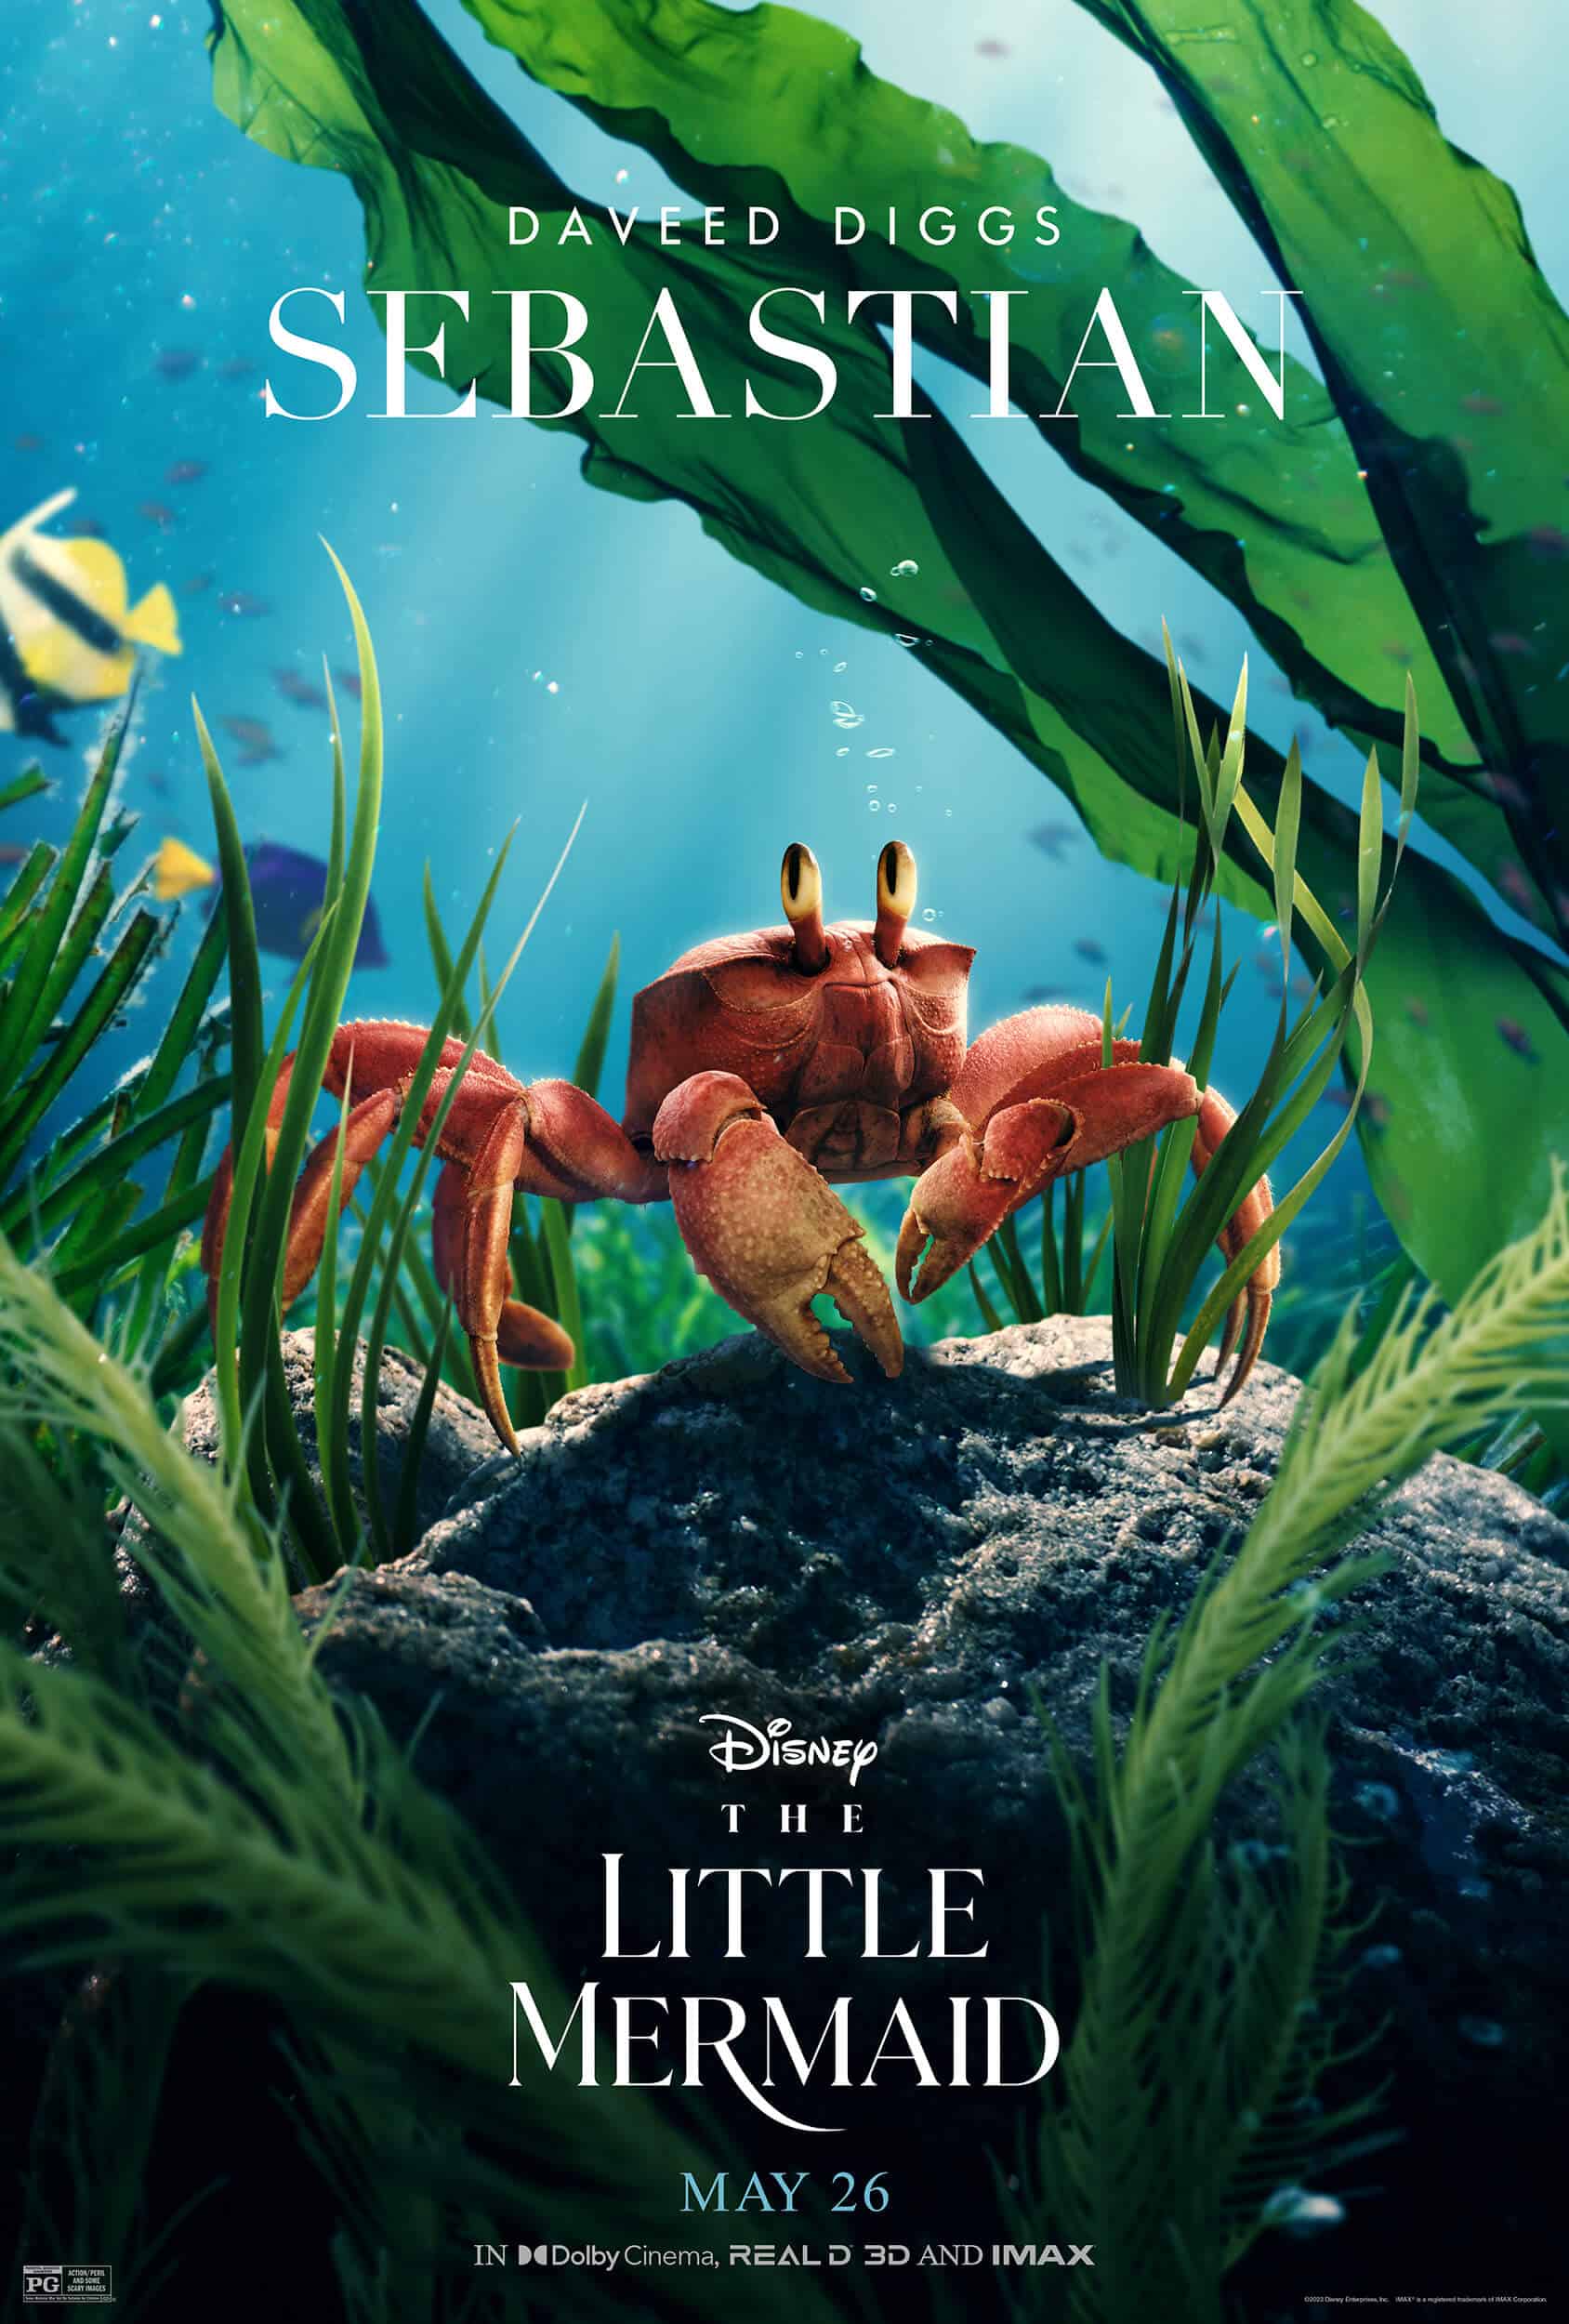 Disney’s “The Little Mermaid” Character Posters Released What's On